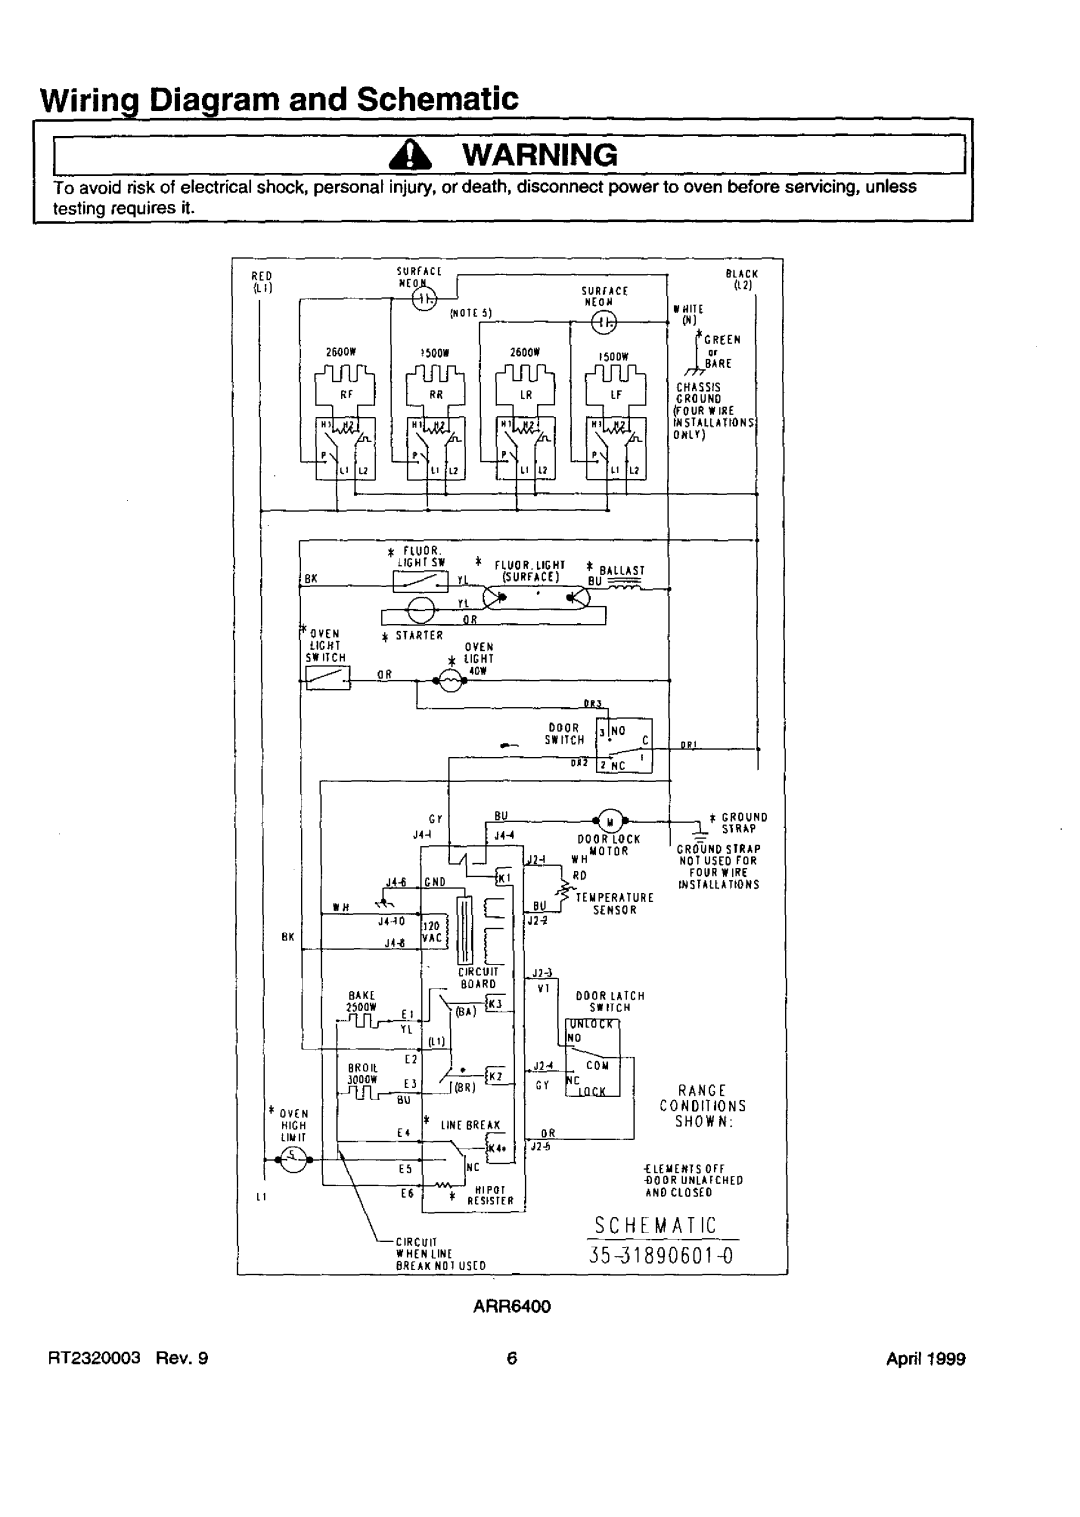 Amana P1142670N _lb WARNING, 0 T;o, Wiring Diagram and Schematic, _TJan, SCHEMATIC 35-5189060149, RT2320003 Rev, Surac 